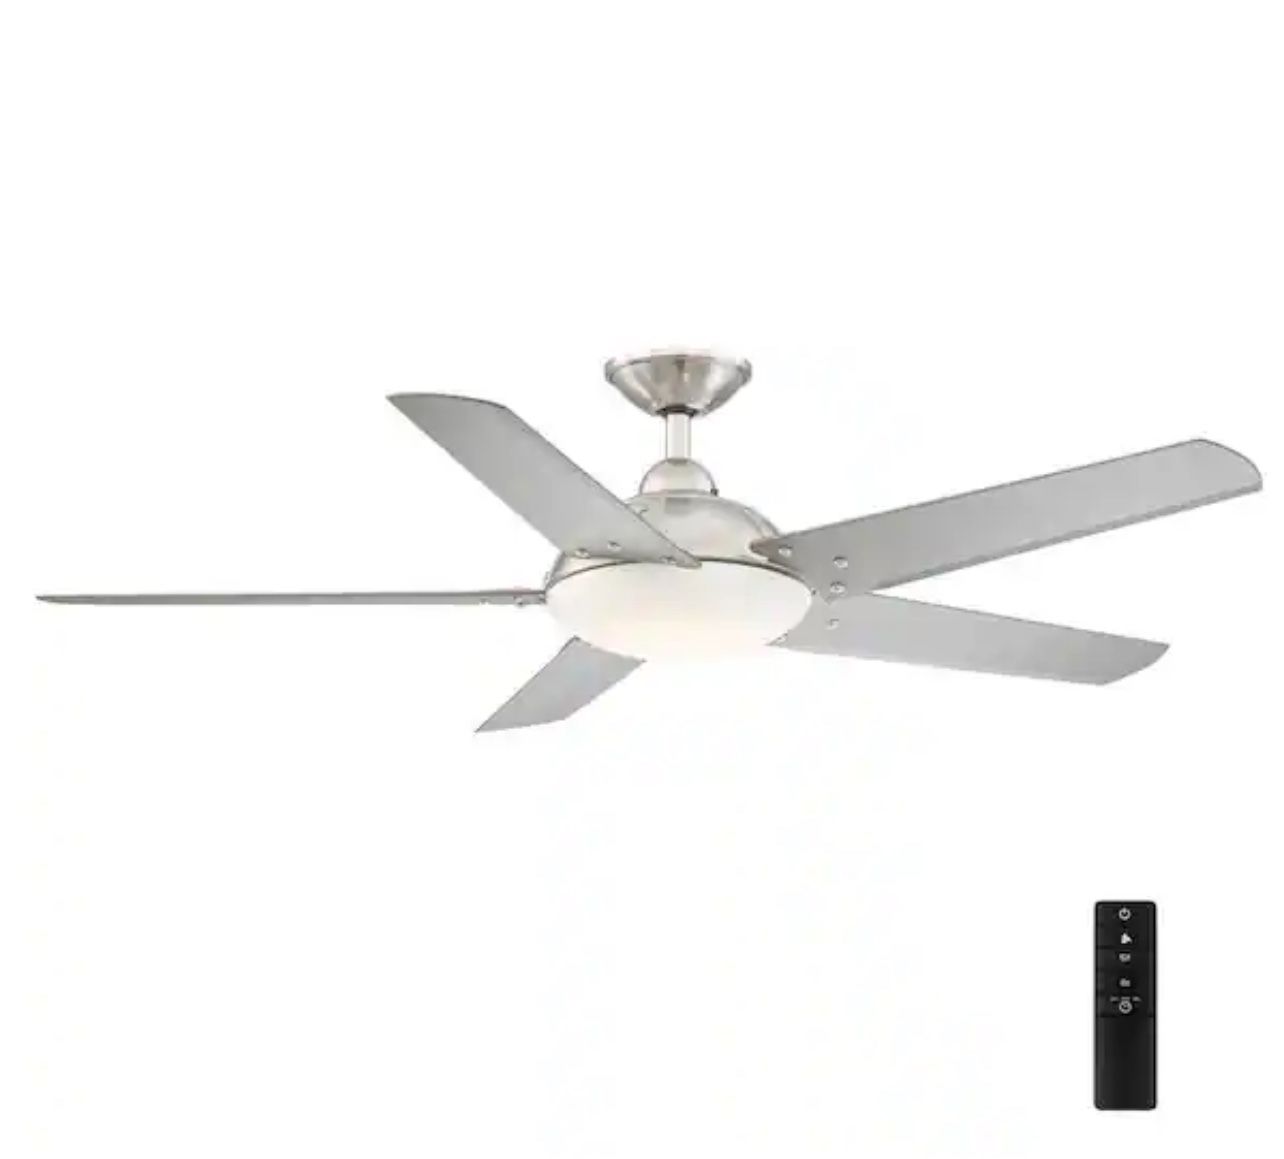 Home Decorators Draper 54 in. Outdoor LED Brushed Nickel Ceiling Fan 